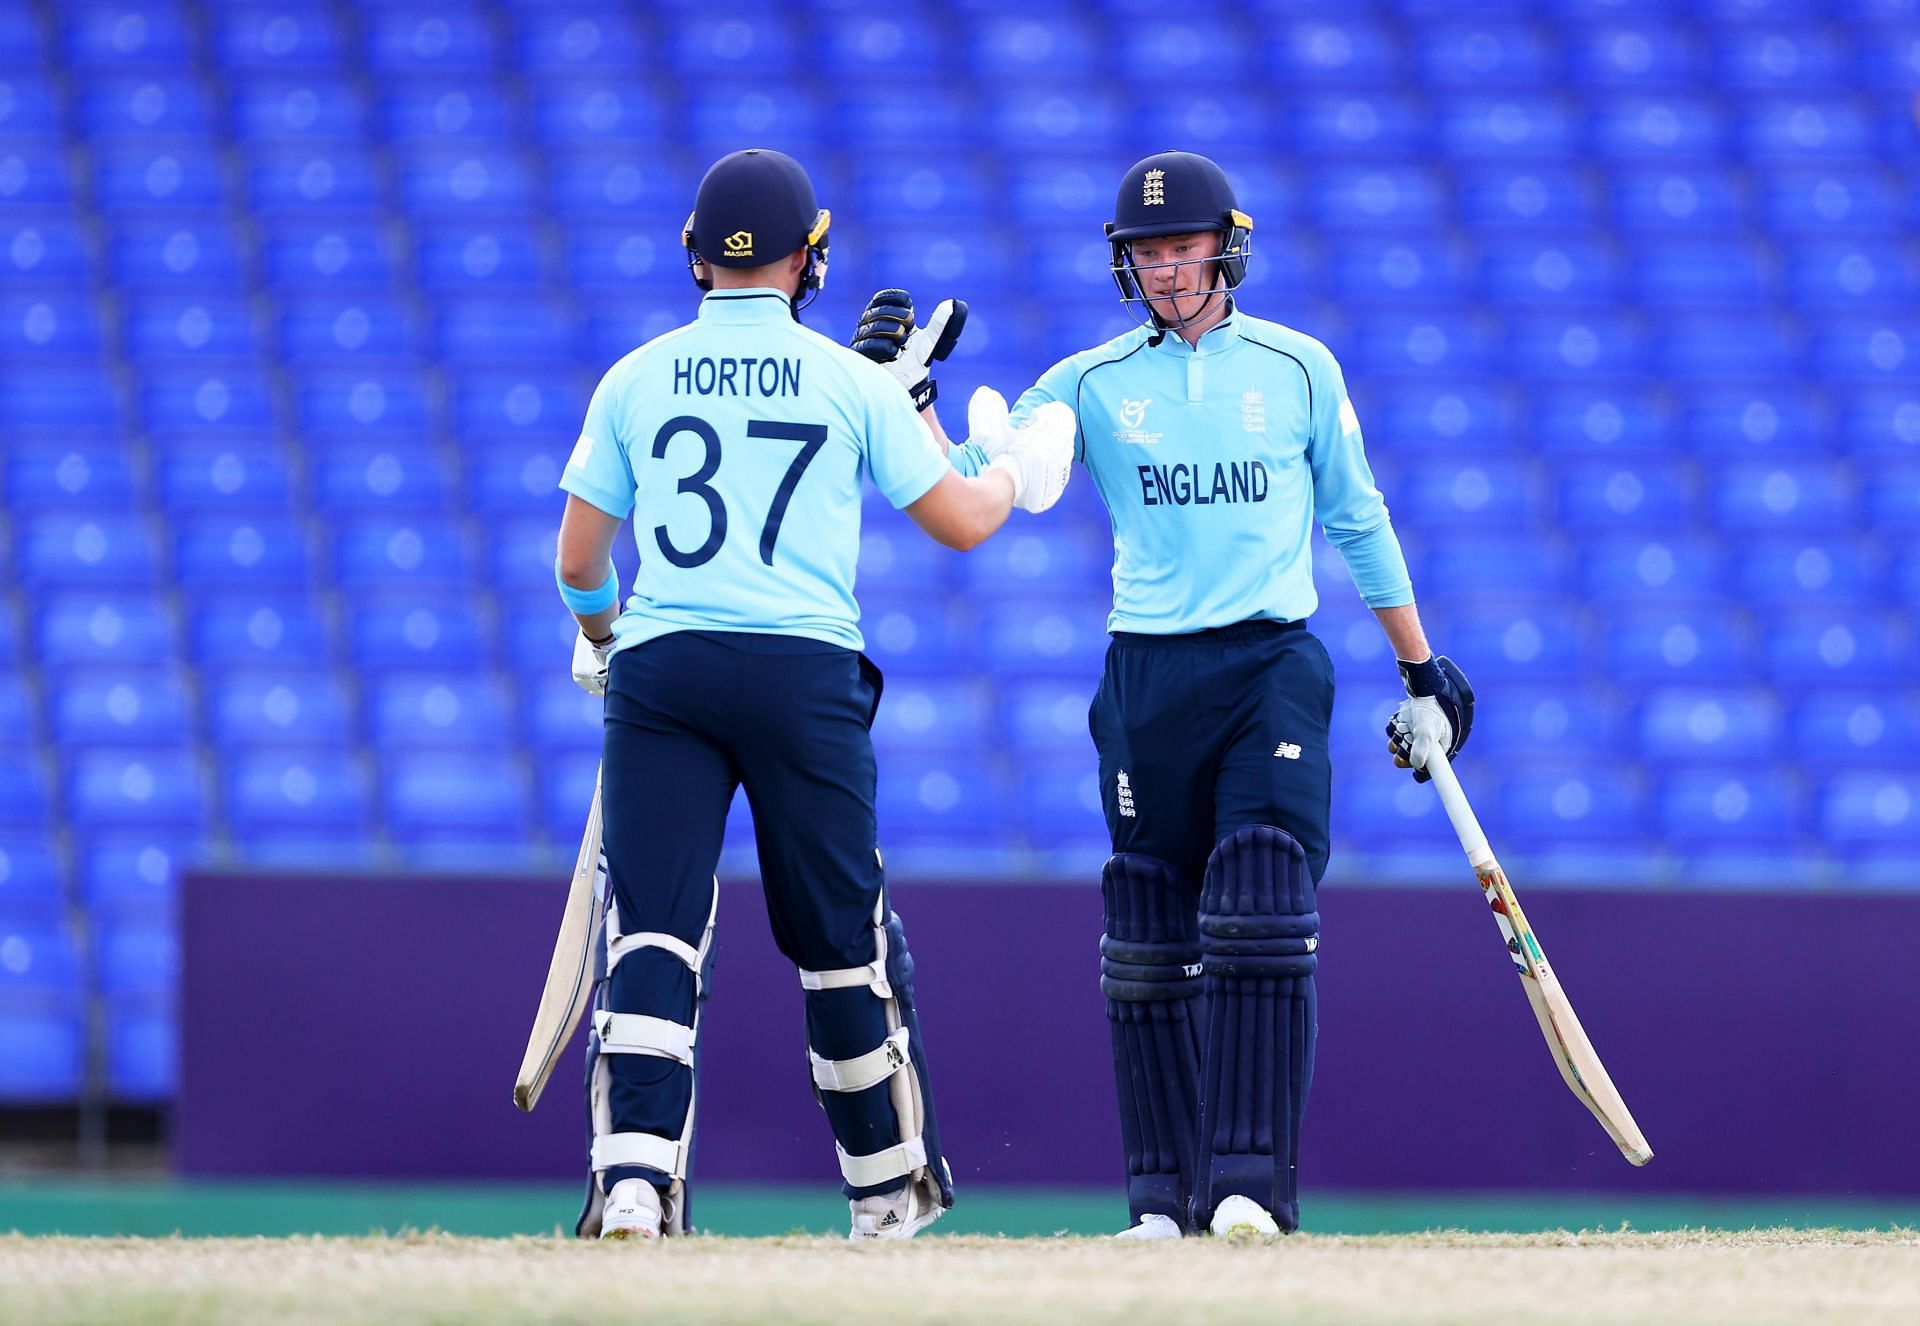 English cricketers at the U19 World Cup - Courtesy: Cricket World Cup Twitter